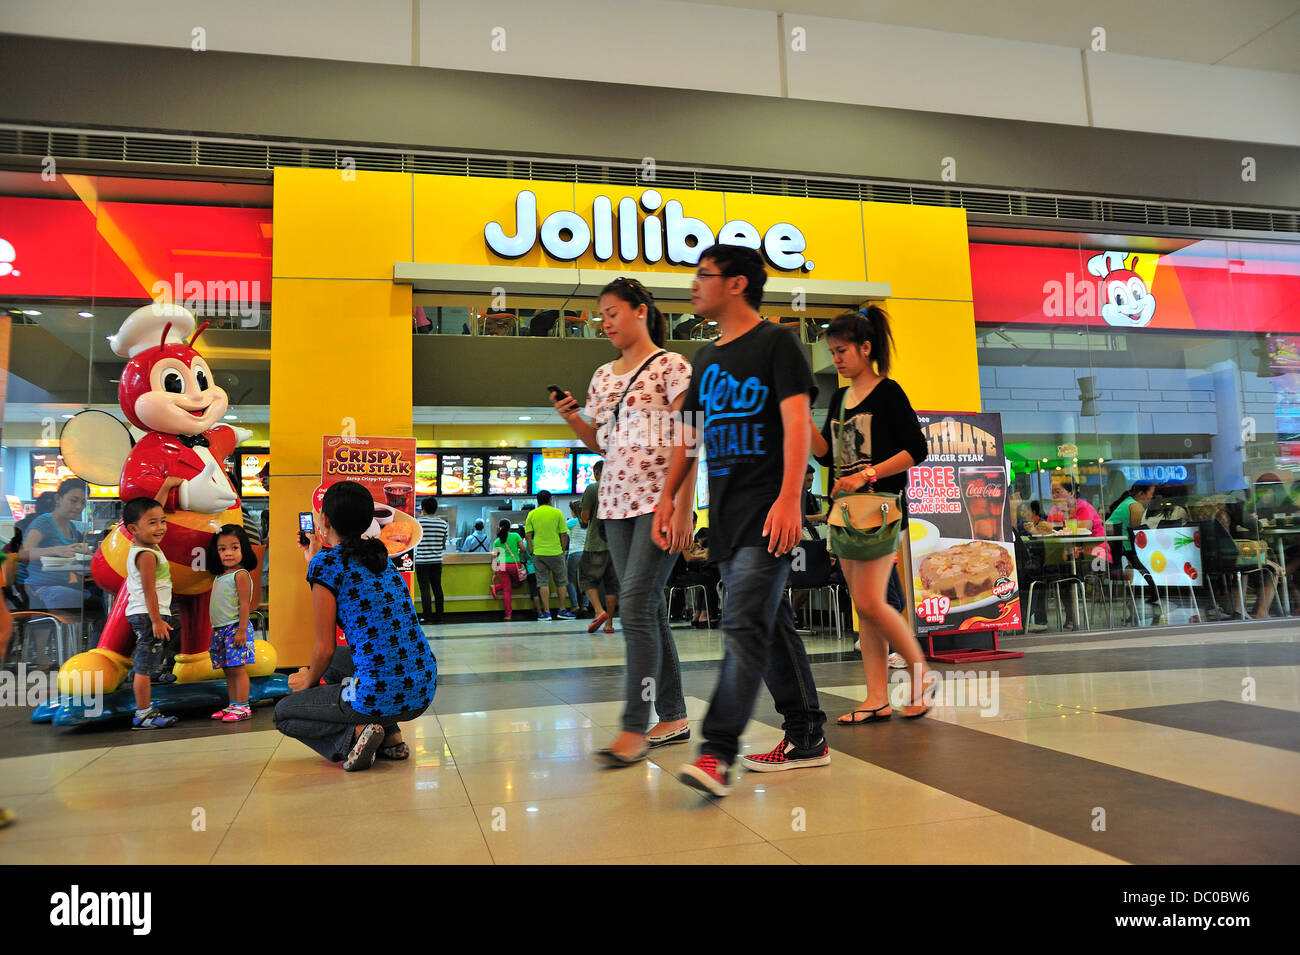 Jollibee Restaurant Fast Food Outlet SM City Mall Cebu. Largest Fast Food Outlet in Philippines with over 10,000 employees Stock Photo